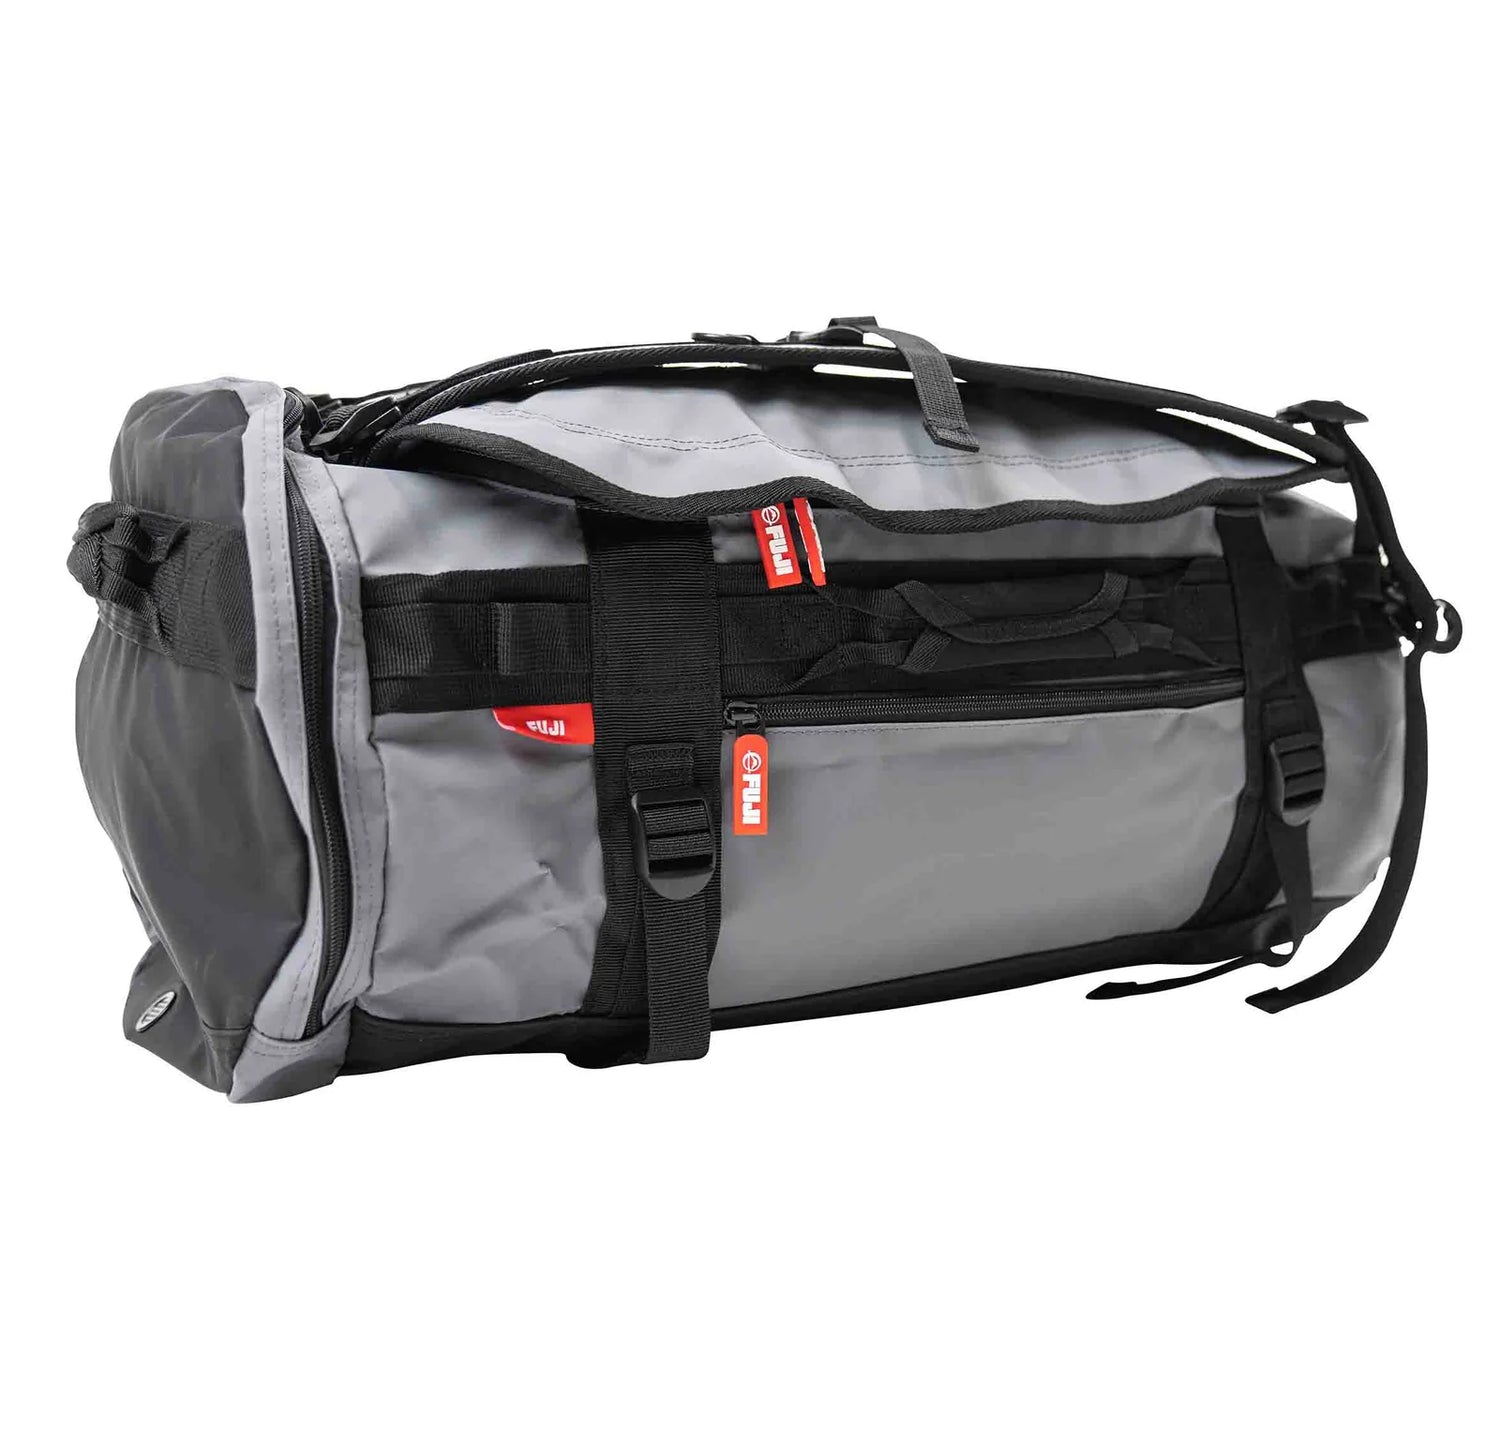 Comp Convertible Backpack Duffle by Fuji (3 Color Choices)